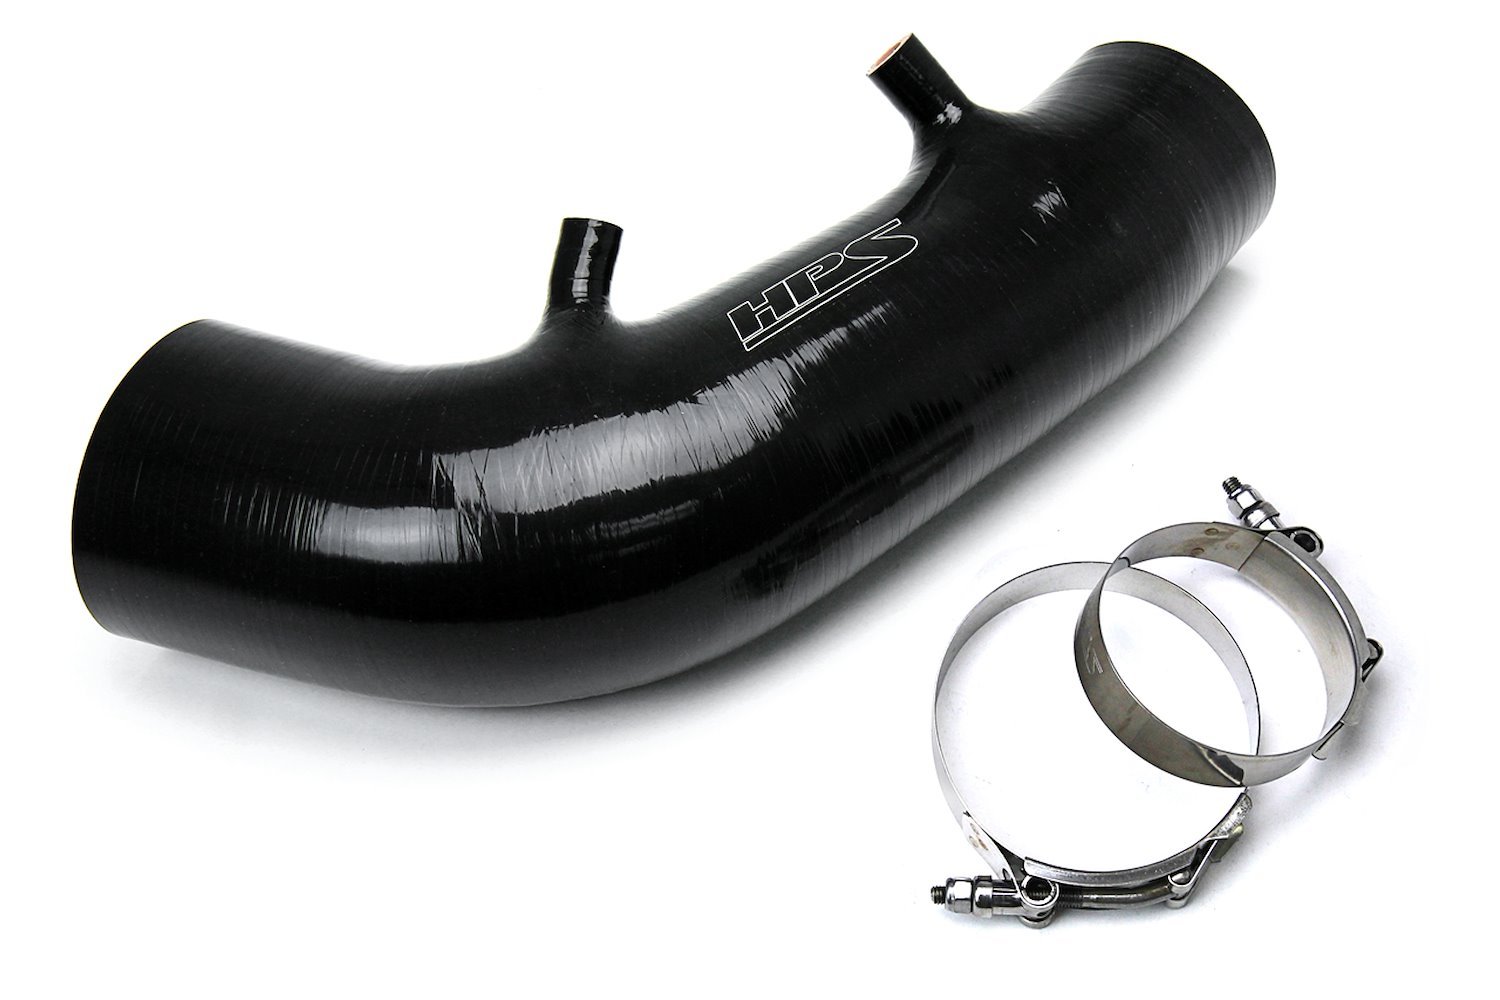 57-3004-BLK Silicone Air Intake, Replace Stock Restrictive Air Intake, Improve Throttle Response, No Heat Soak